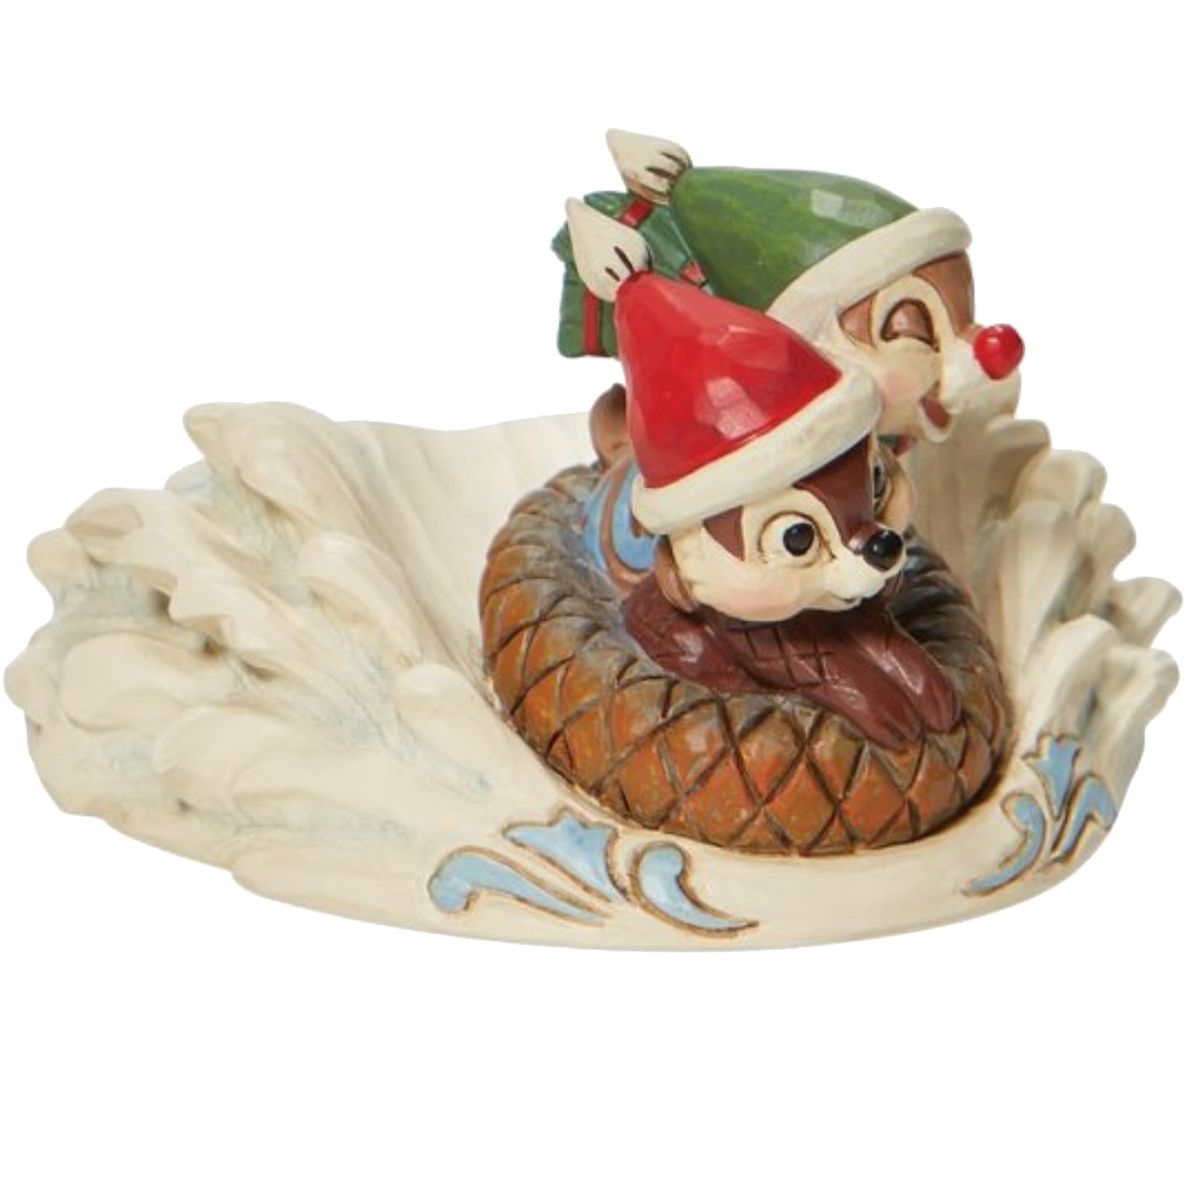 Fun in the Snow - Chip and Dale Sledding Figurine